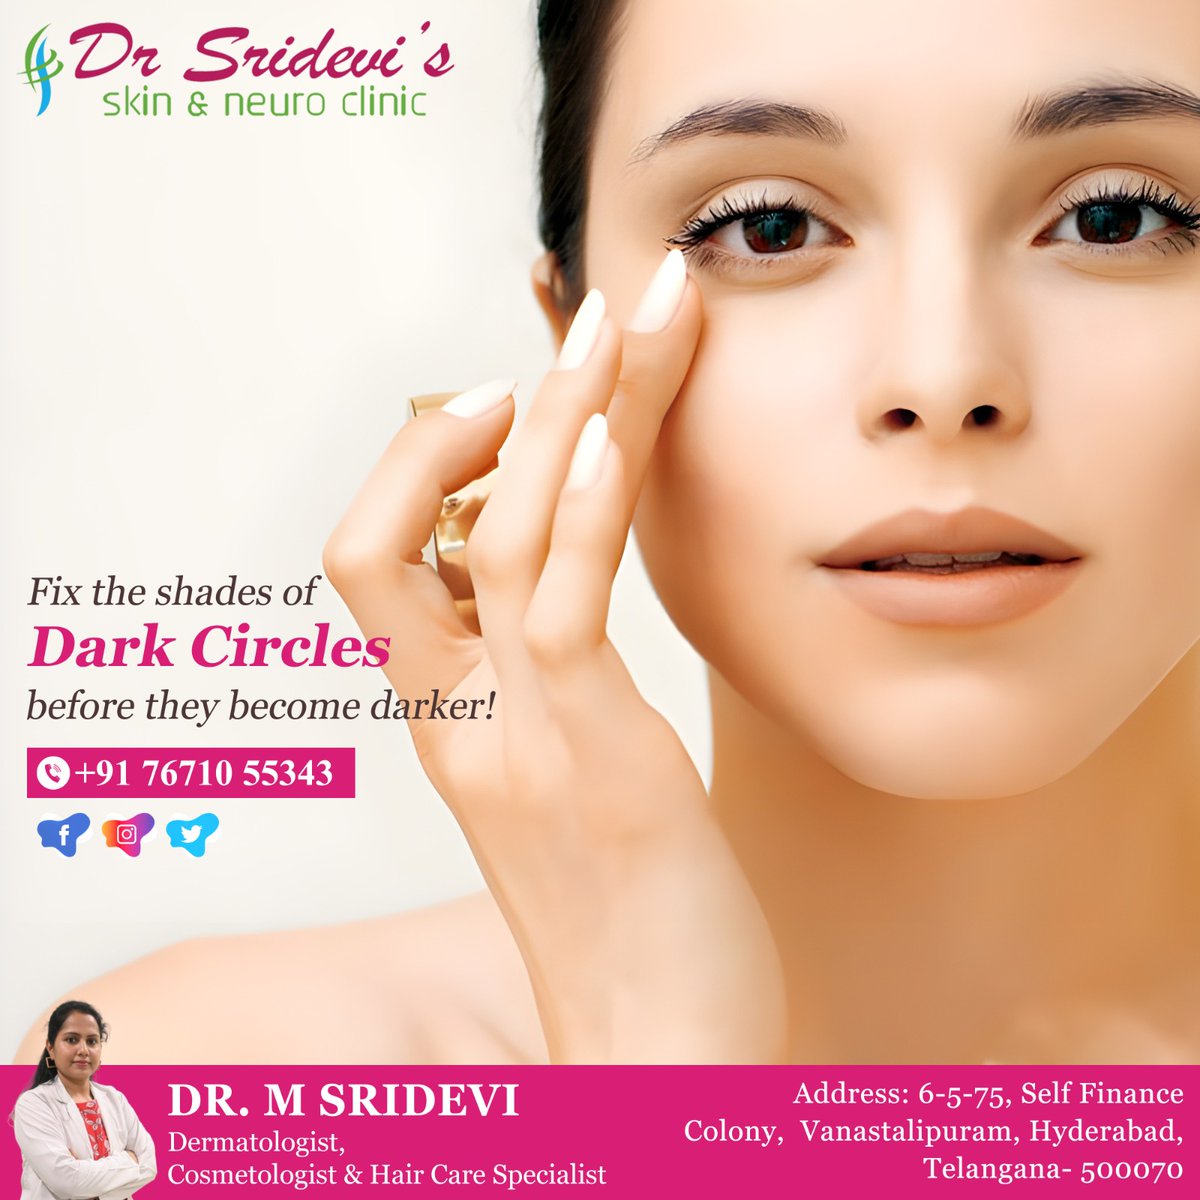 Prevent worsening #darkcircles by prioritizing #sleep, #hydration, healthy diet, and managing stress. Protect your eyes for vibrant health.

#drsridevi #skin&neuroclinic #dermatologist #cosmetologist #haircarespecialist #dermatology #skincare #haircare #beauty #skinspecialist